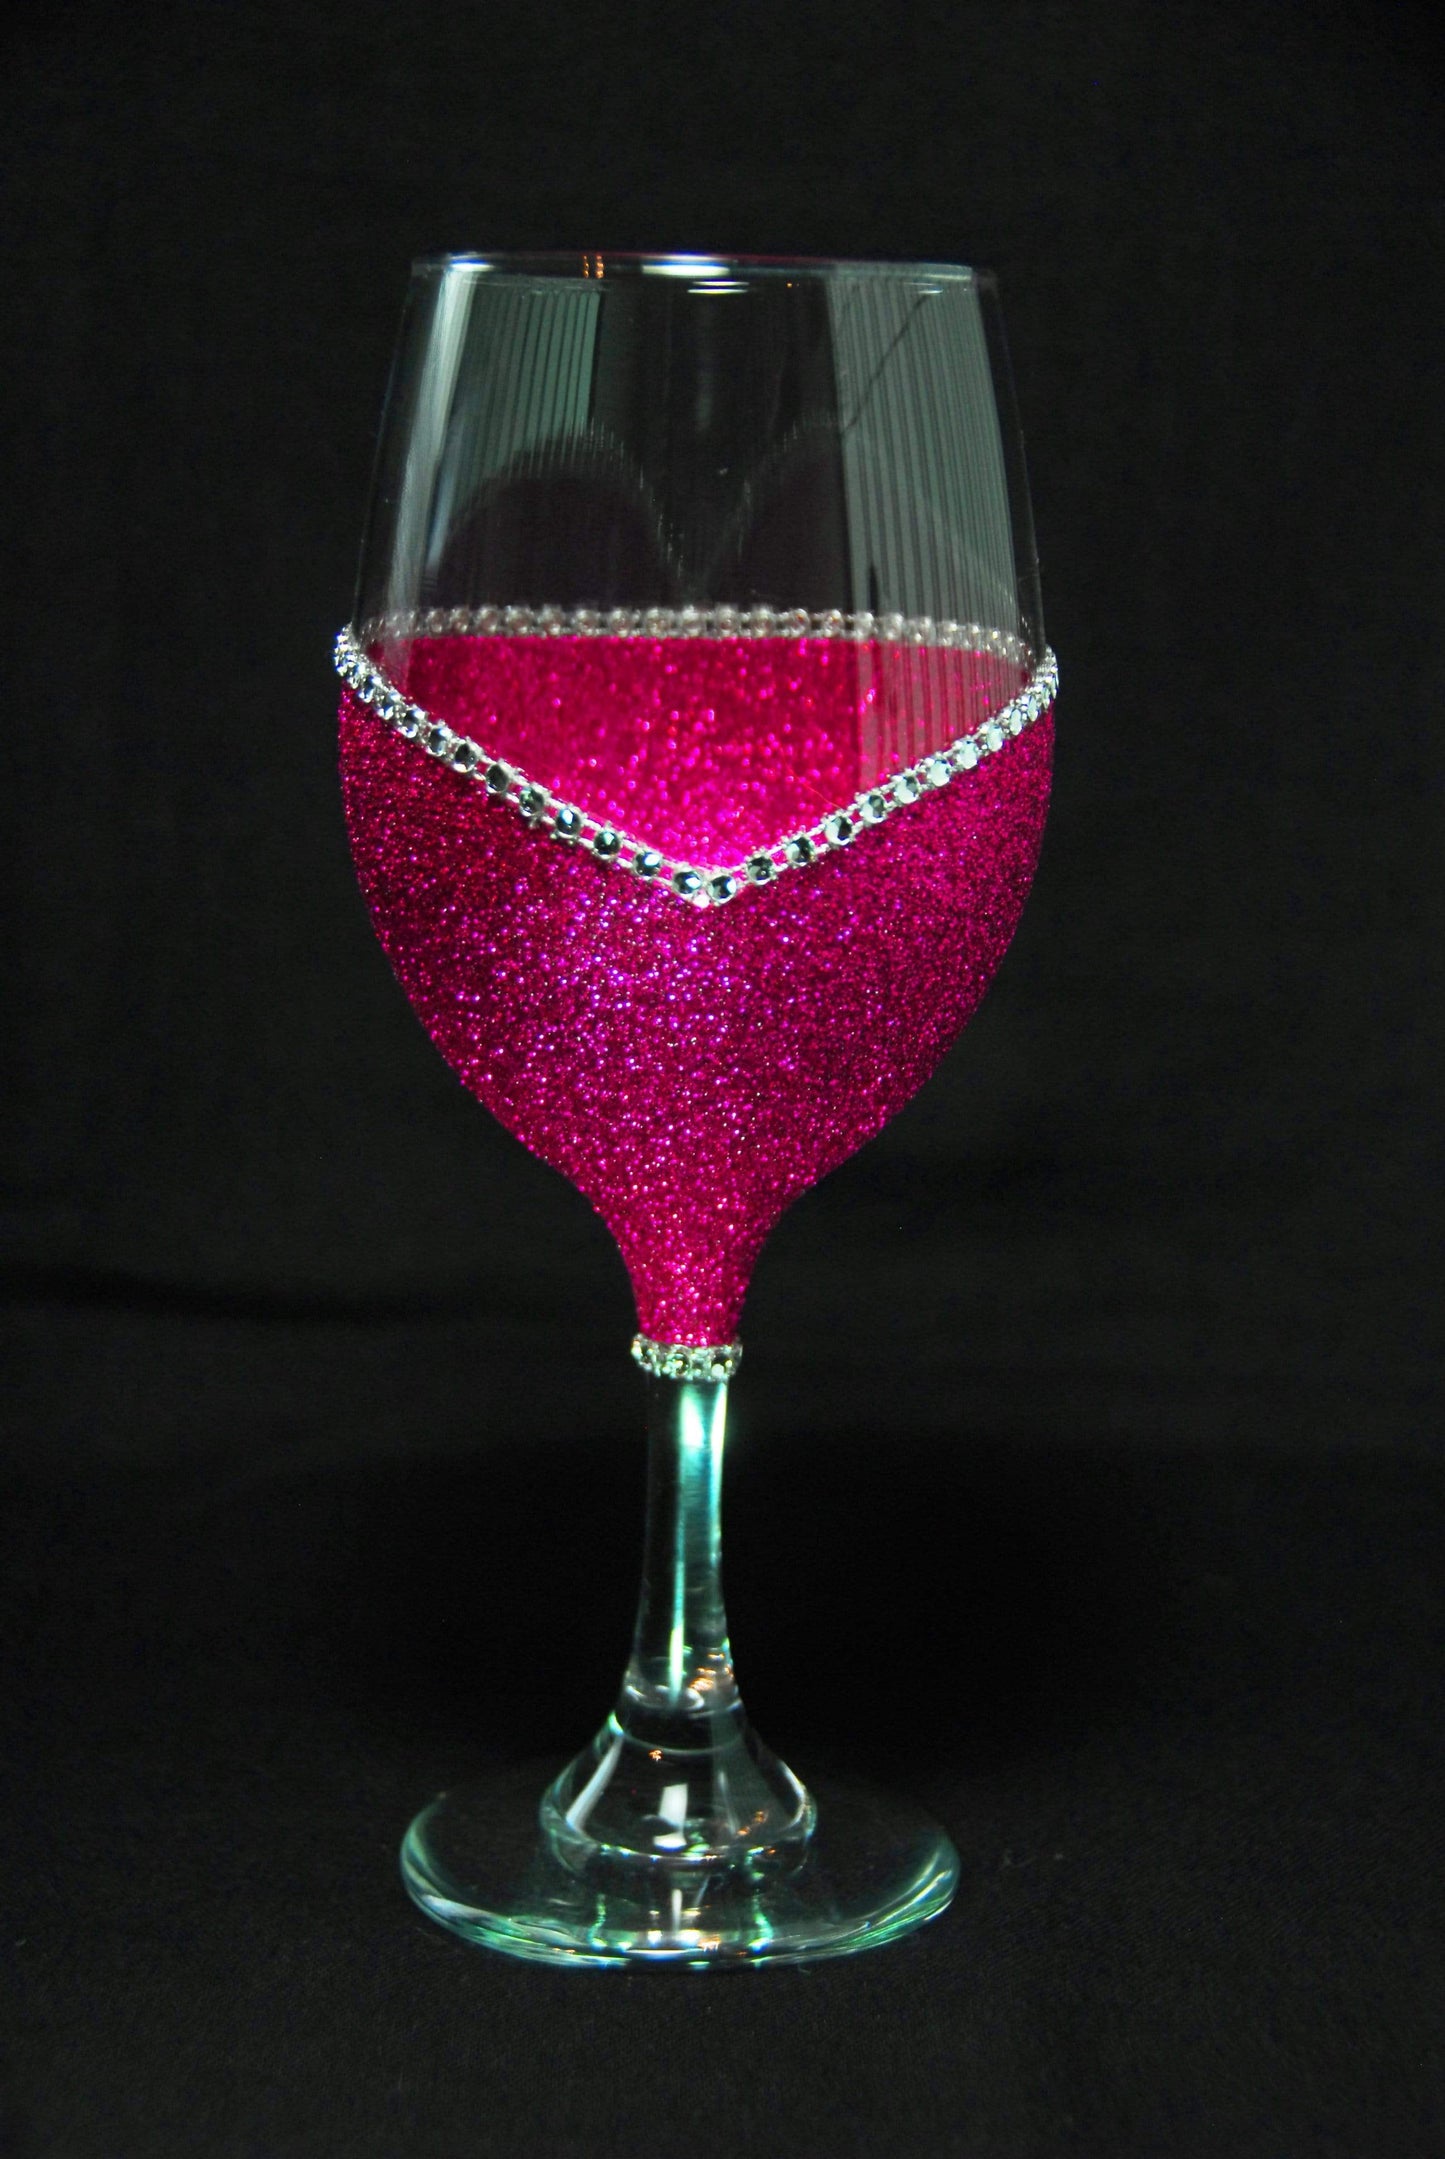 Drinkware Fushia / Stem Cleveland Indians Bling Stem or Stemless Wine Glasses-Choose your color WineyBitchesCo